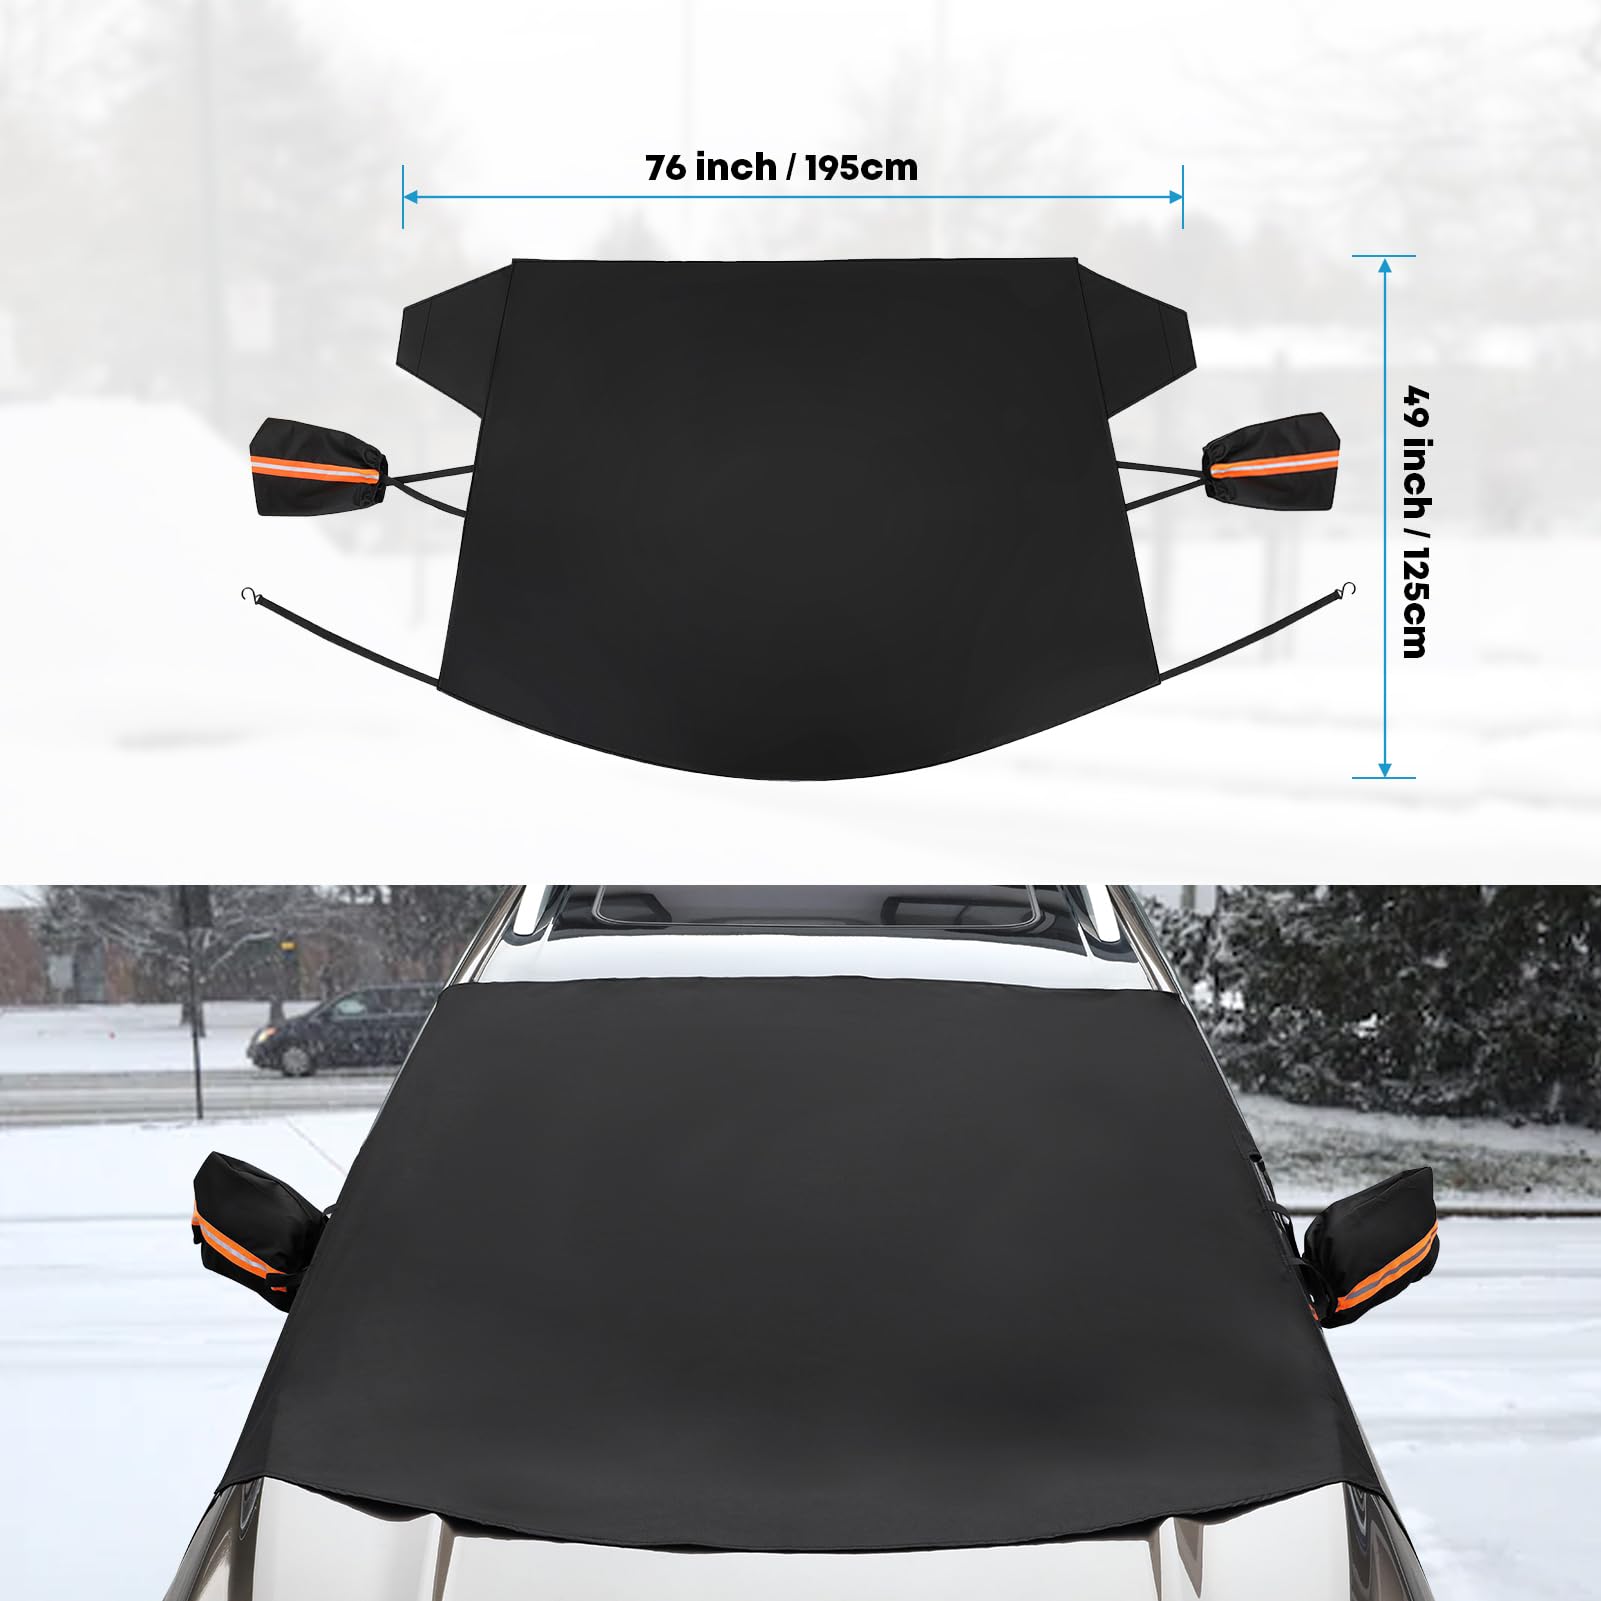 Windshield Cover for Snow